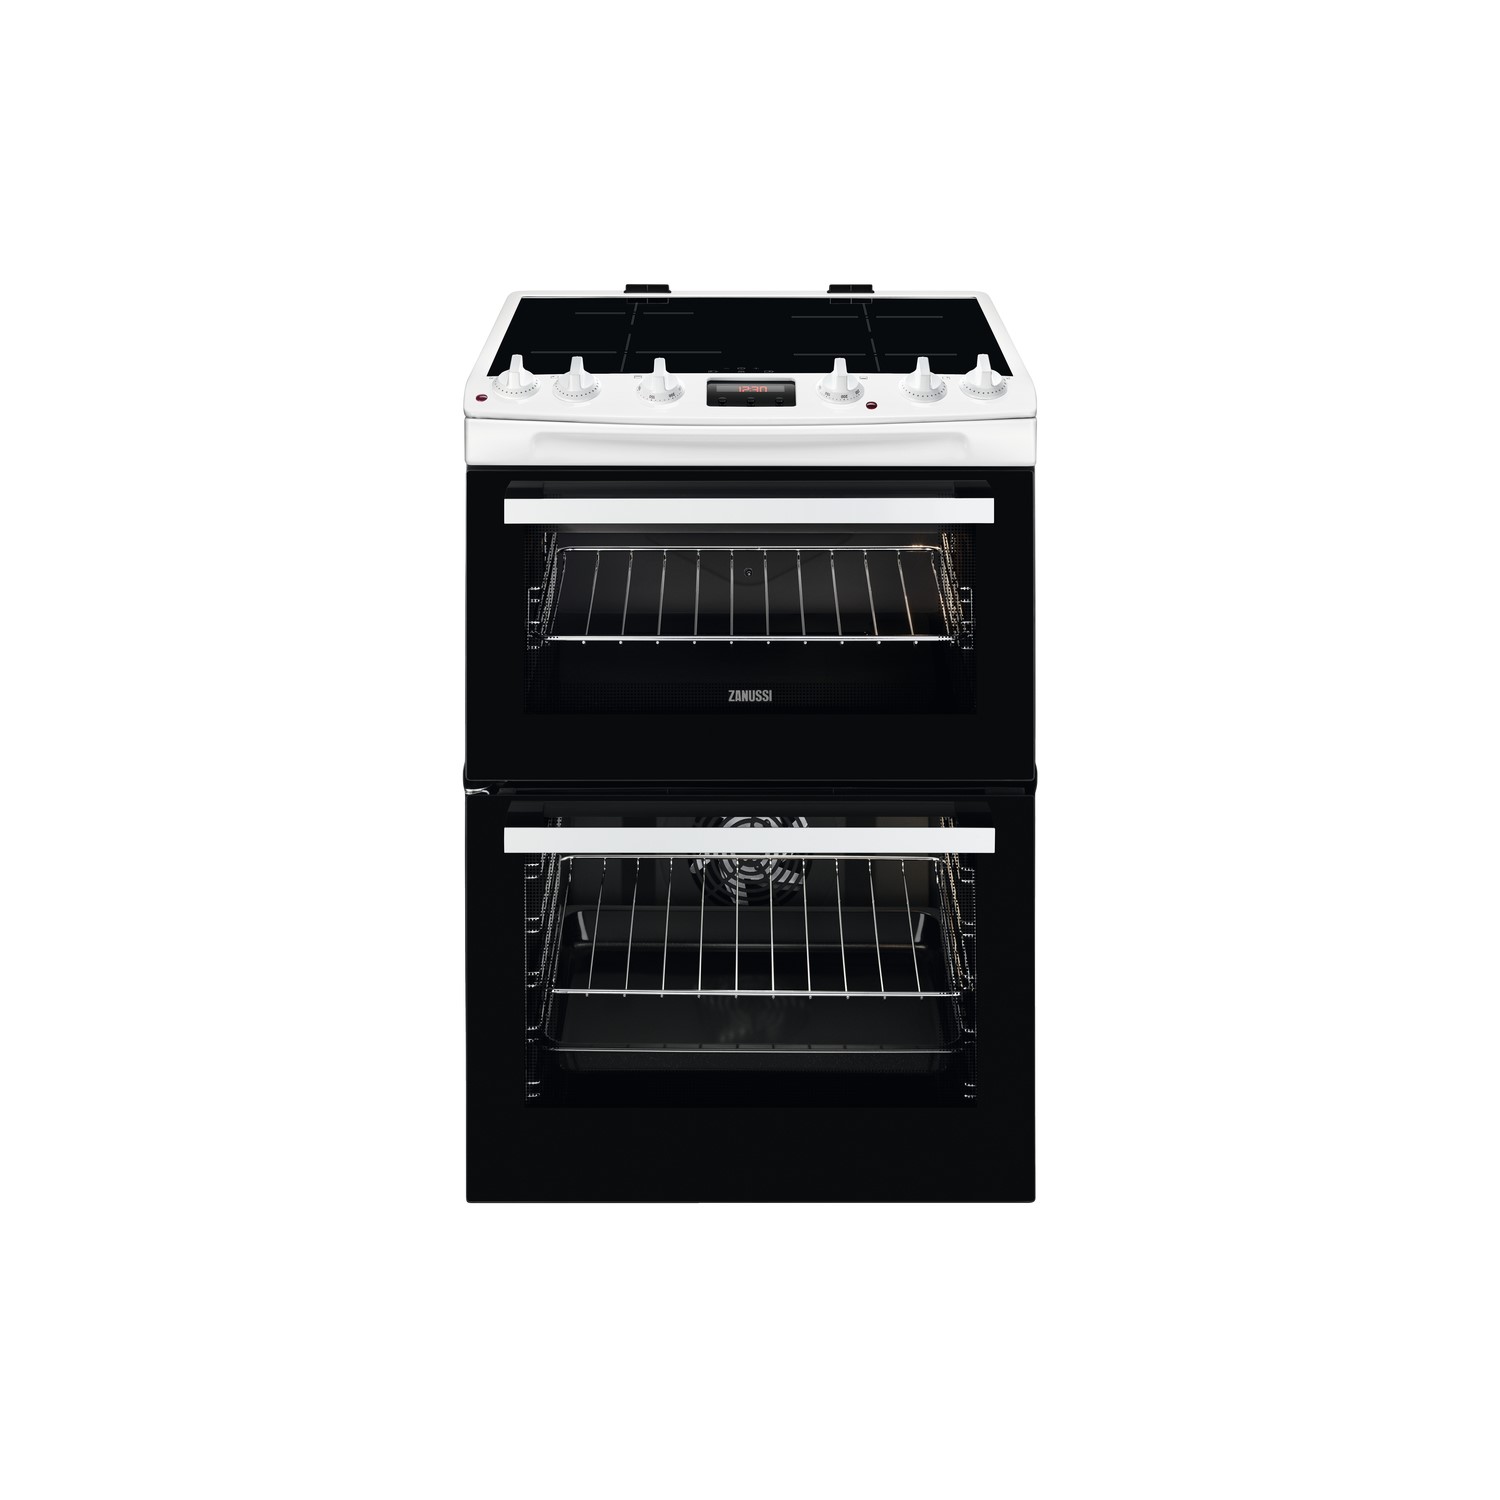 Zanussi 60cm Double Oven Induction Electric Cooker - White